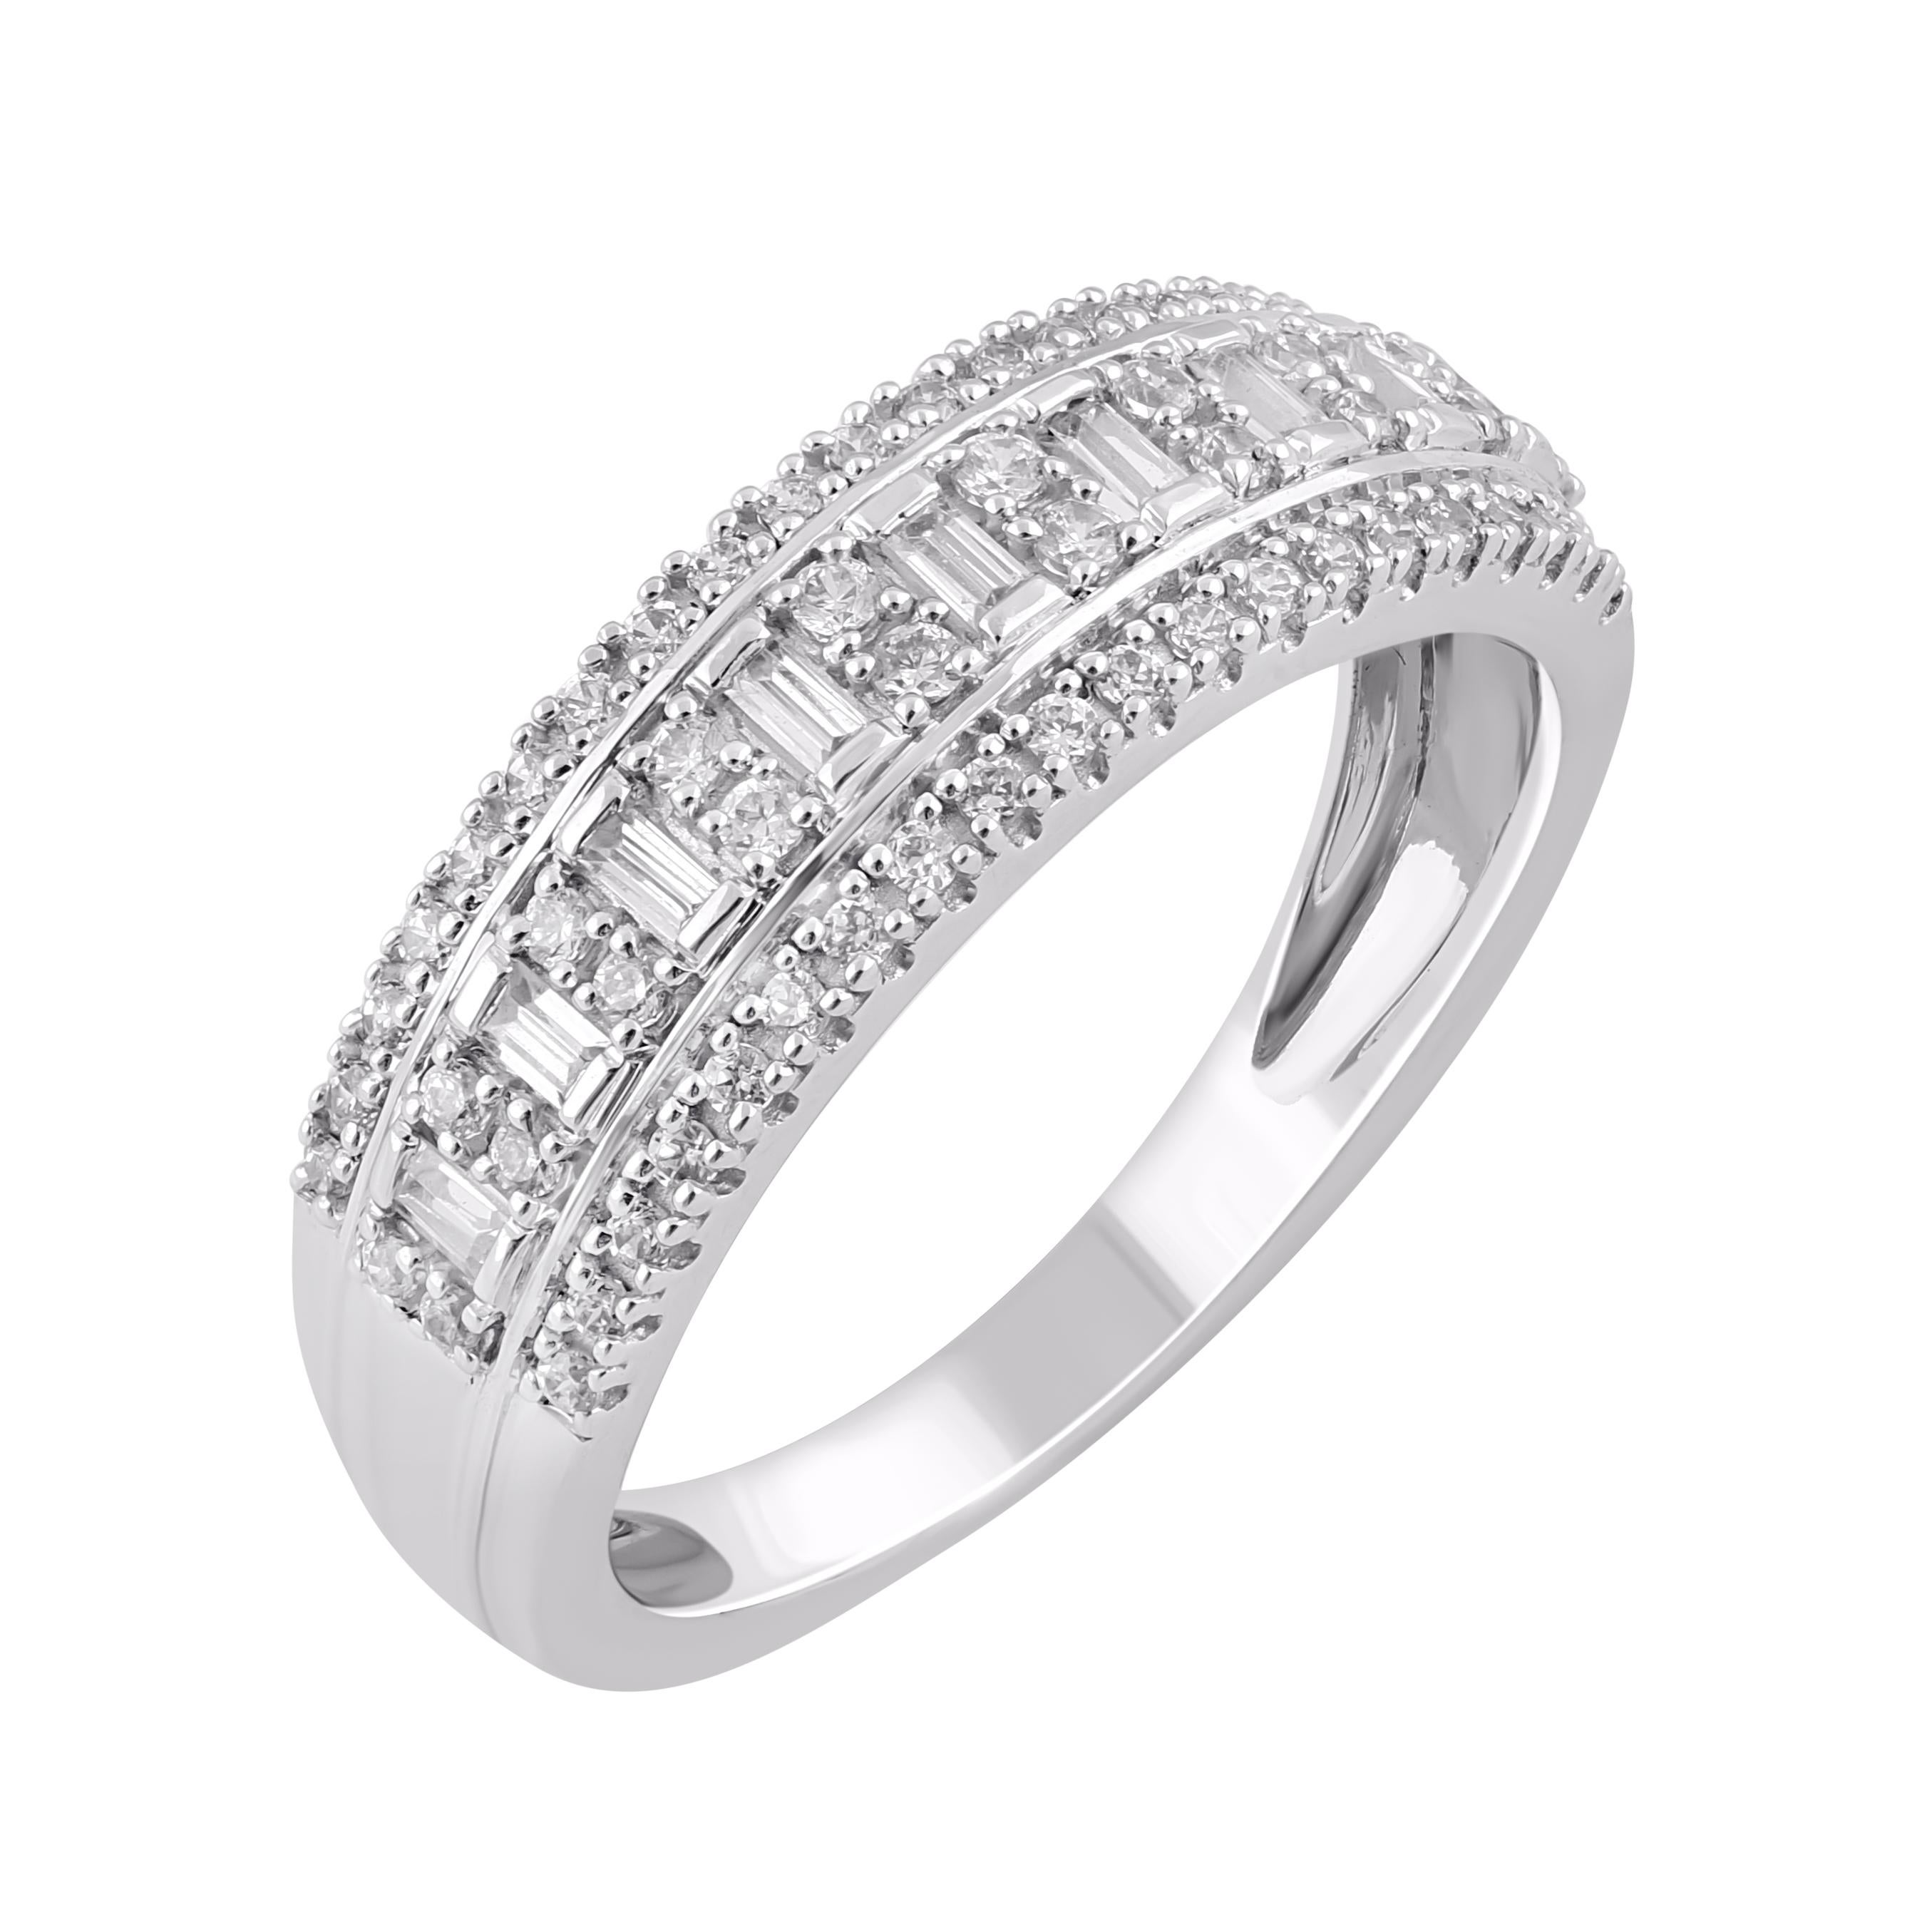 Contemporary TJD 0.50 Carat Round and Baguette Diamond 14 Karat White Gold Wedding Band Ring For Sale